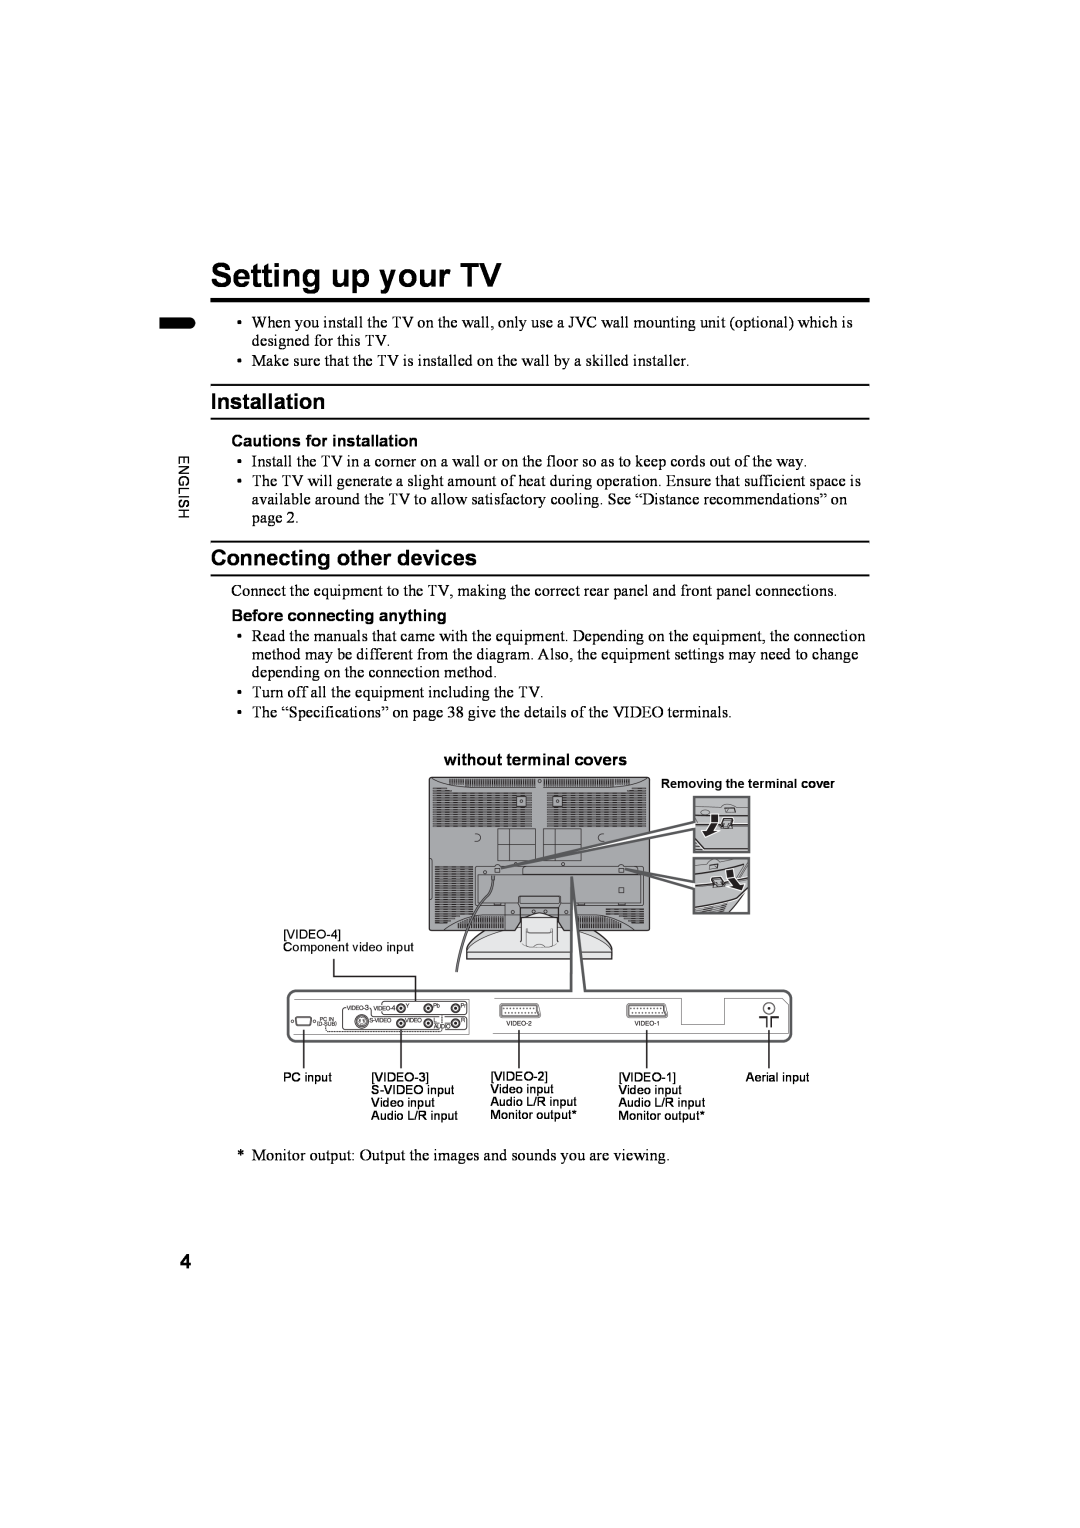 JVC LT-26AX5, LT-32AX5 manual Setting up your TV, Installation, Connecting other devices, Cautions for installation 